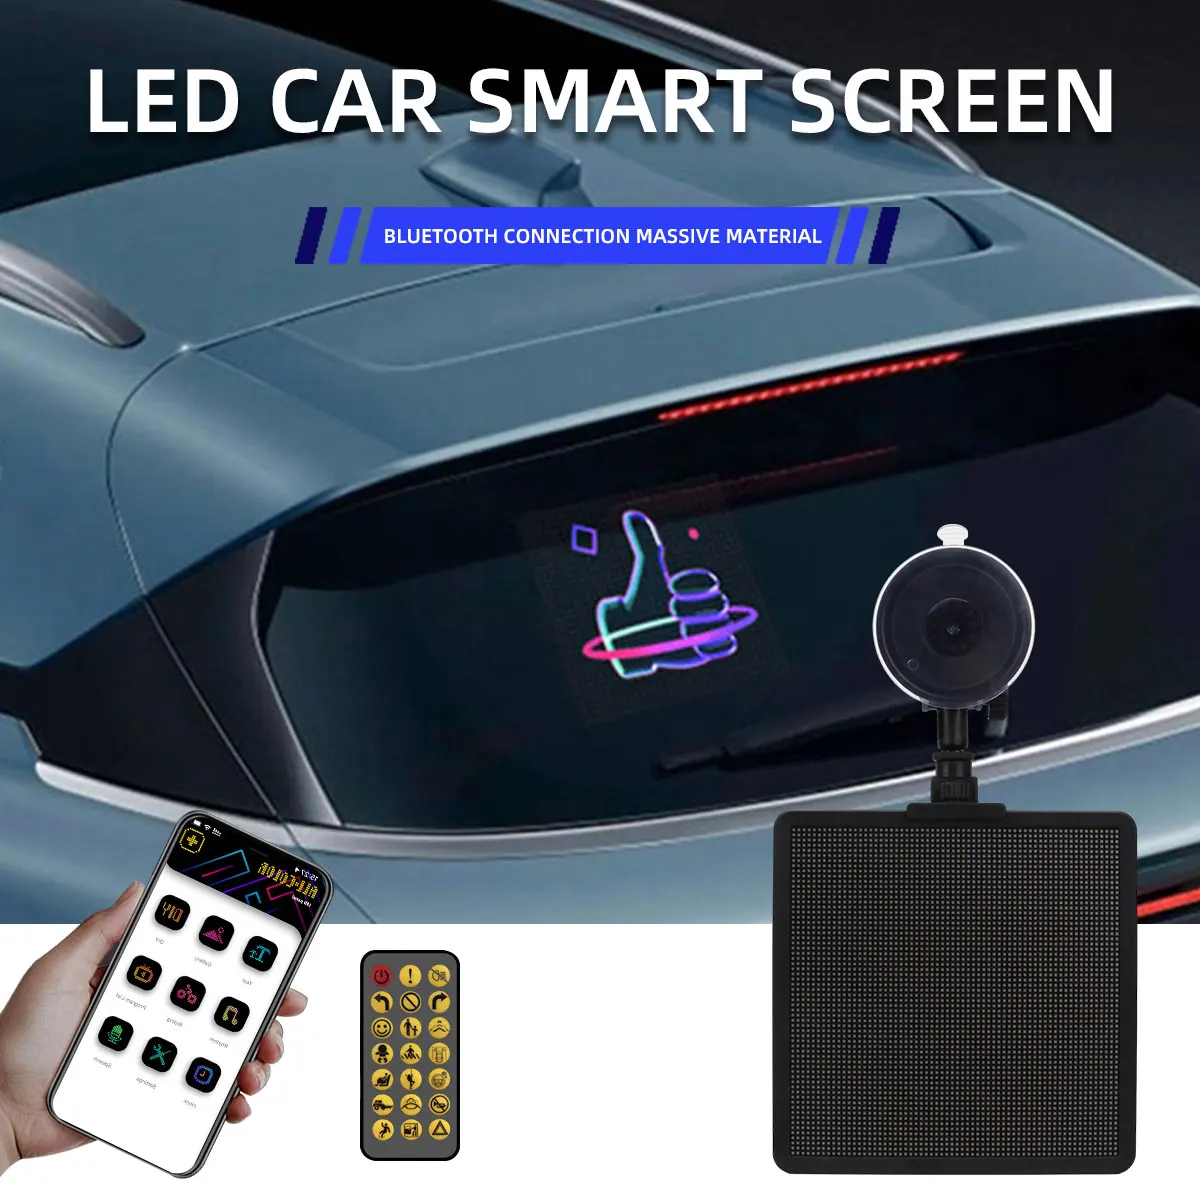 

Car LED Screen Sign Bluetooth Scrolling Message App Control with Remote Finger Light Display Sign Custom Text Pattern Animation